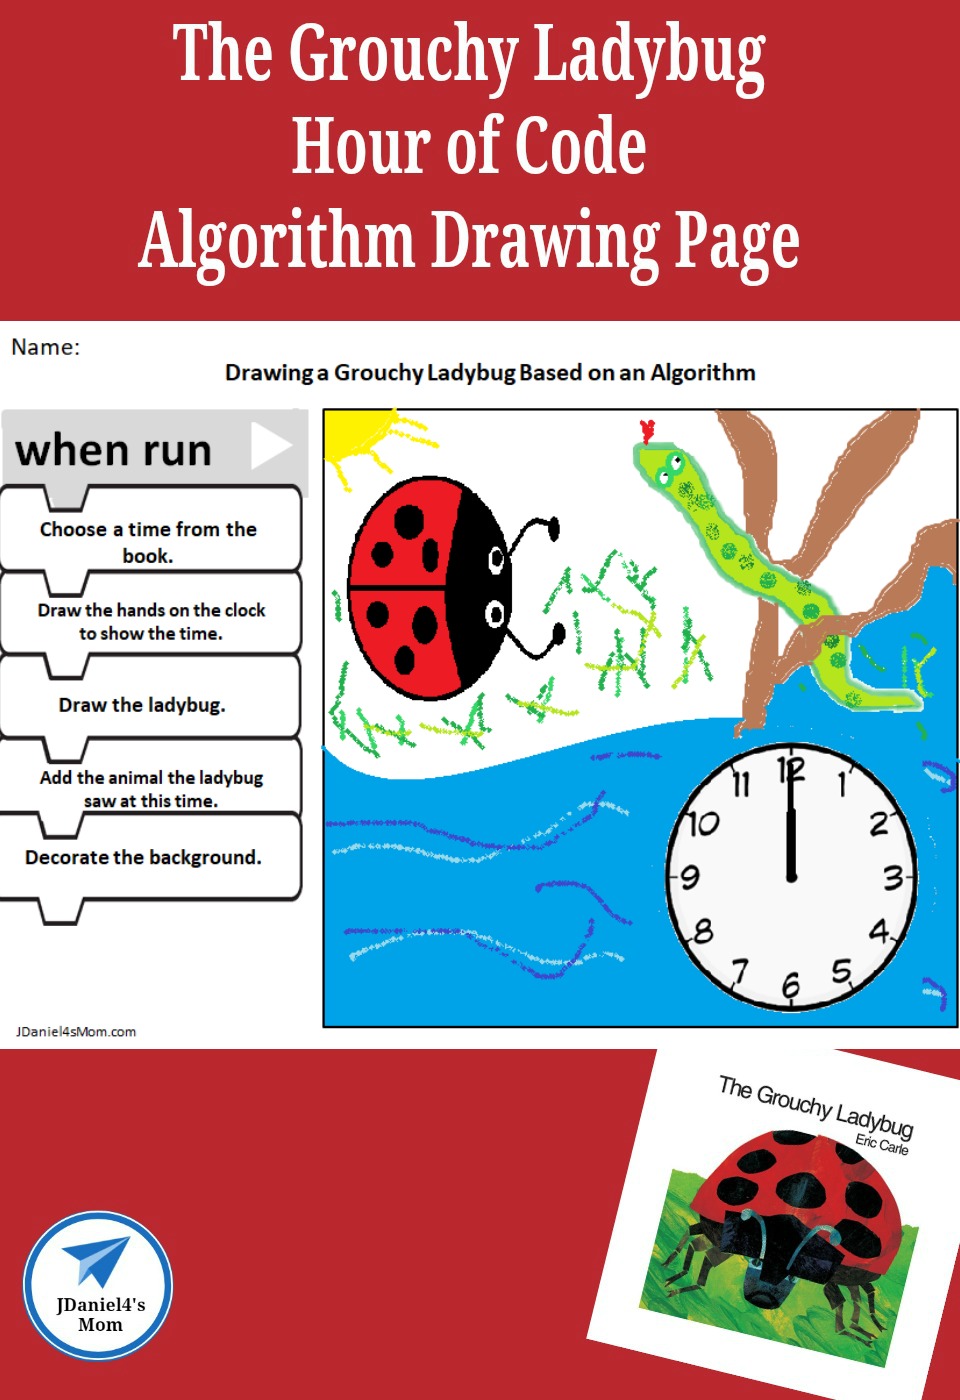 This offline coding activity invites children to explore coding and create an illustration based on the book The Grouchy Ladybug. It is a wonderful offline Hour of Code activity. You will find a number of coding and algorithm activities on JDaniel4's Mom.com. #HourofCode #coding #algorithm #TheGrouchyLadybug #EricCarle #jdaniel4smom